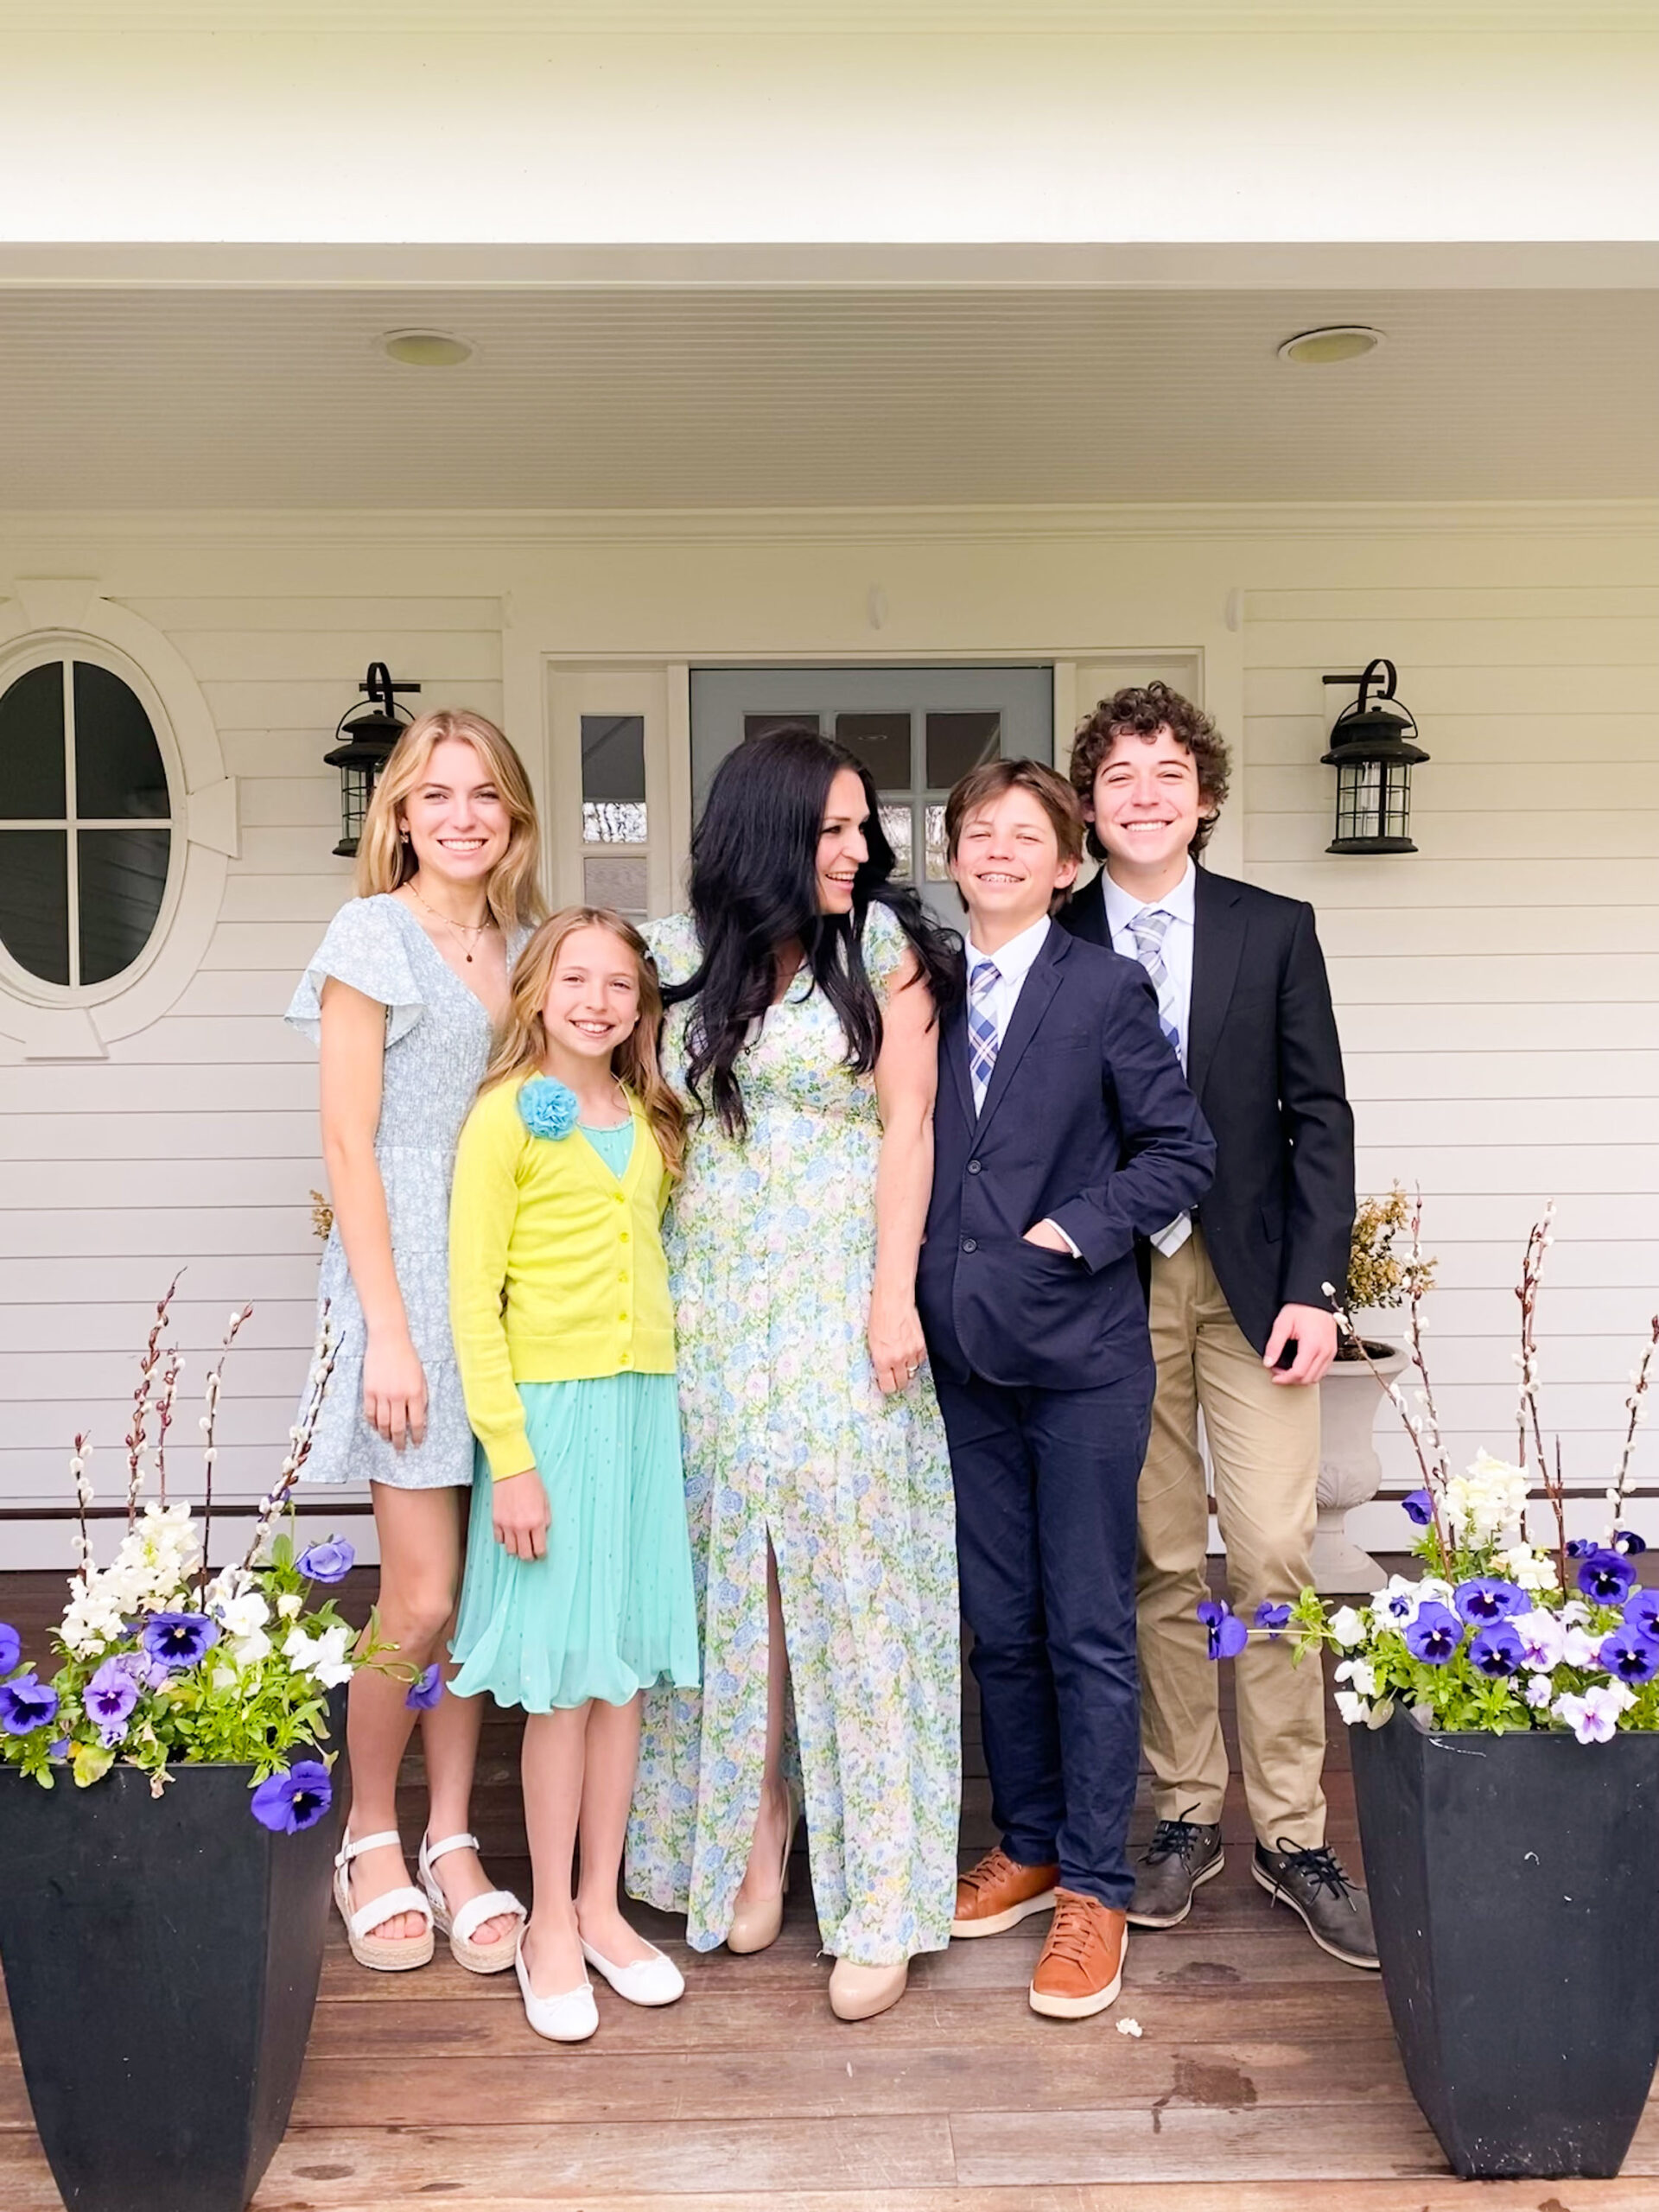 Sharing some of my favorite dress stores for Mother's Day that you can also match with your girls and boys. Perfect for spring also! || Darling Darleen Top CT Lifestyle Blogger #dressstores